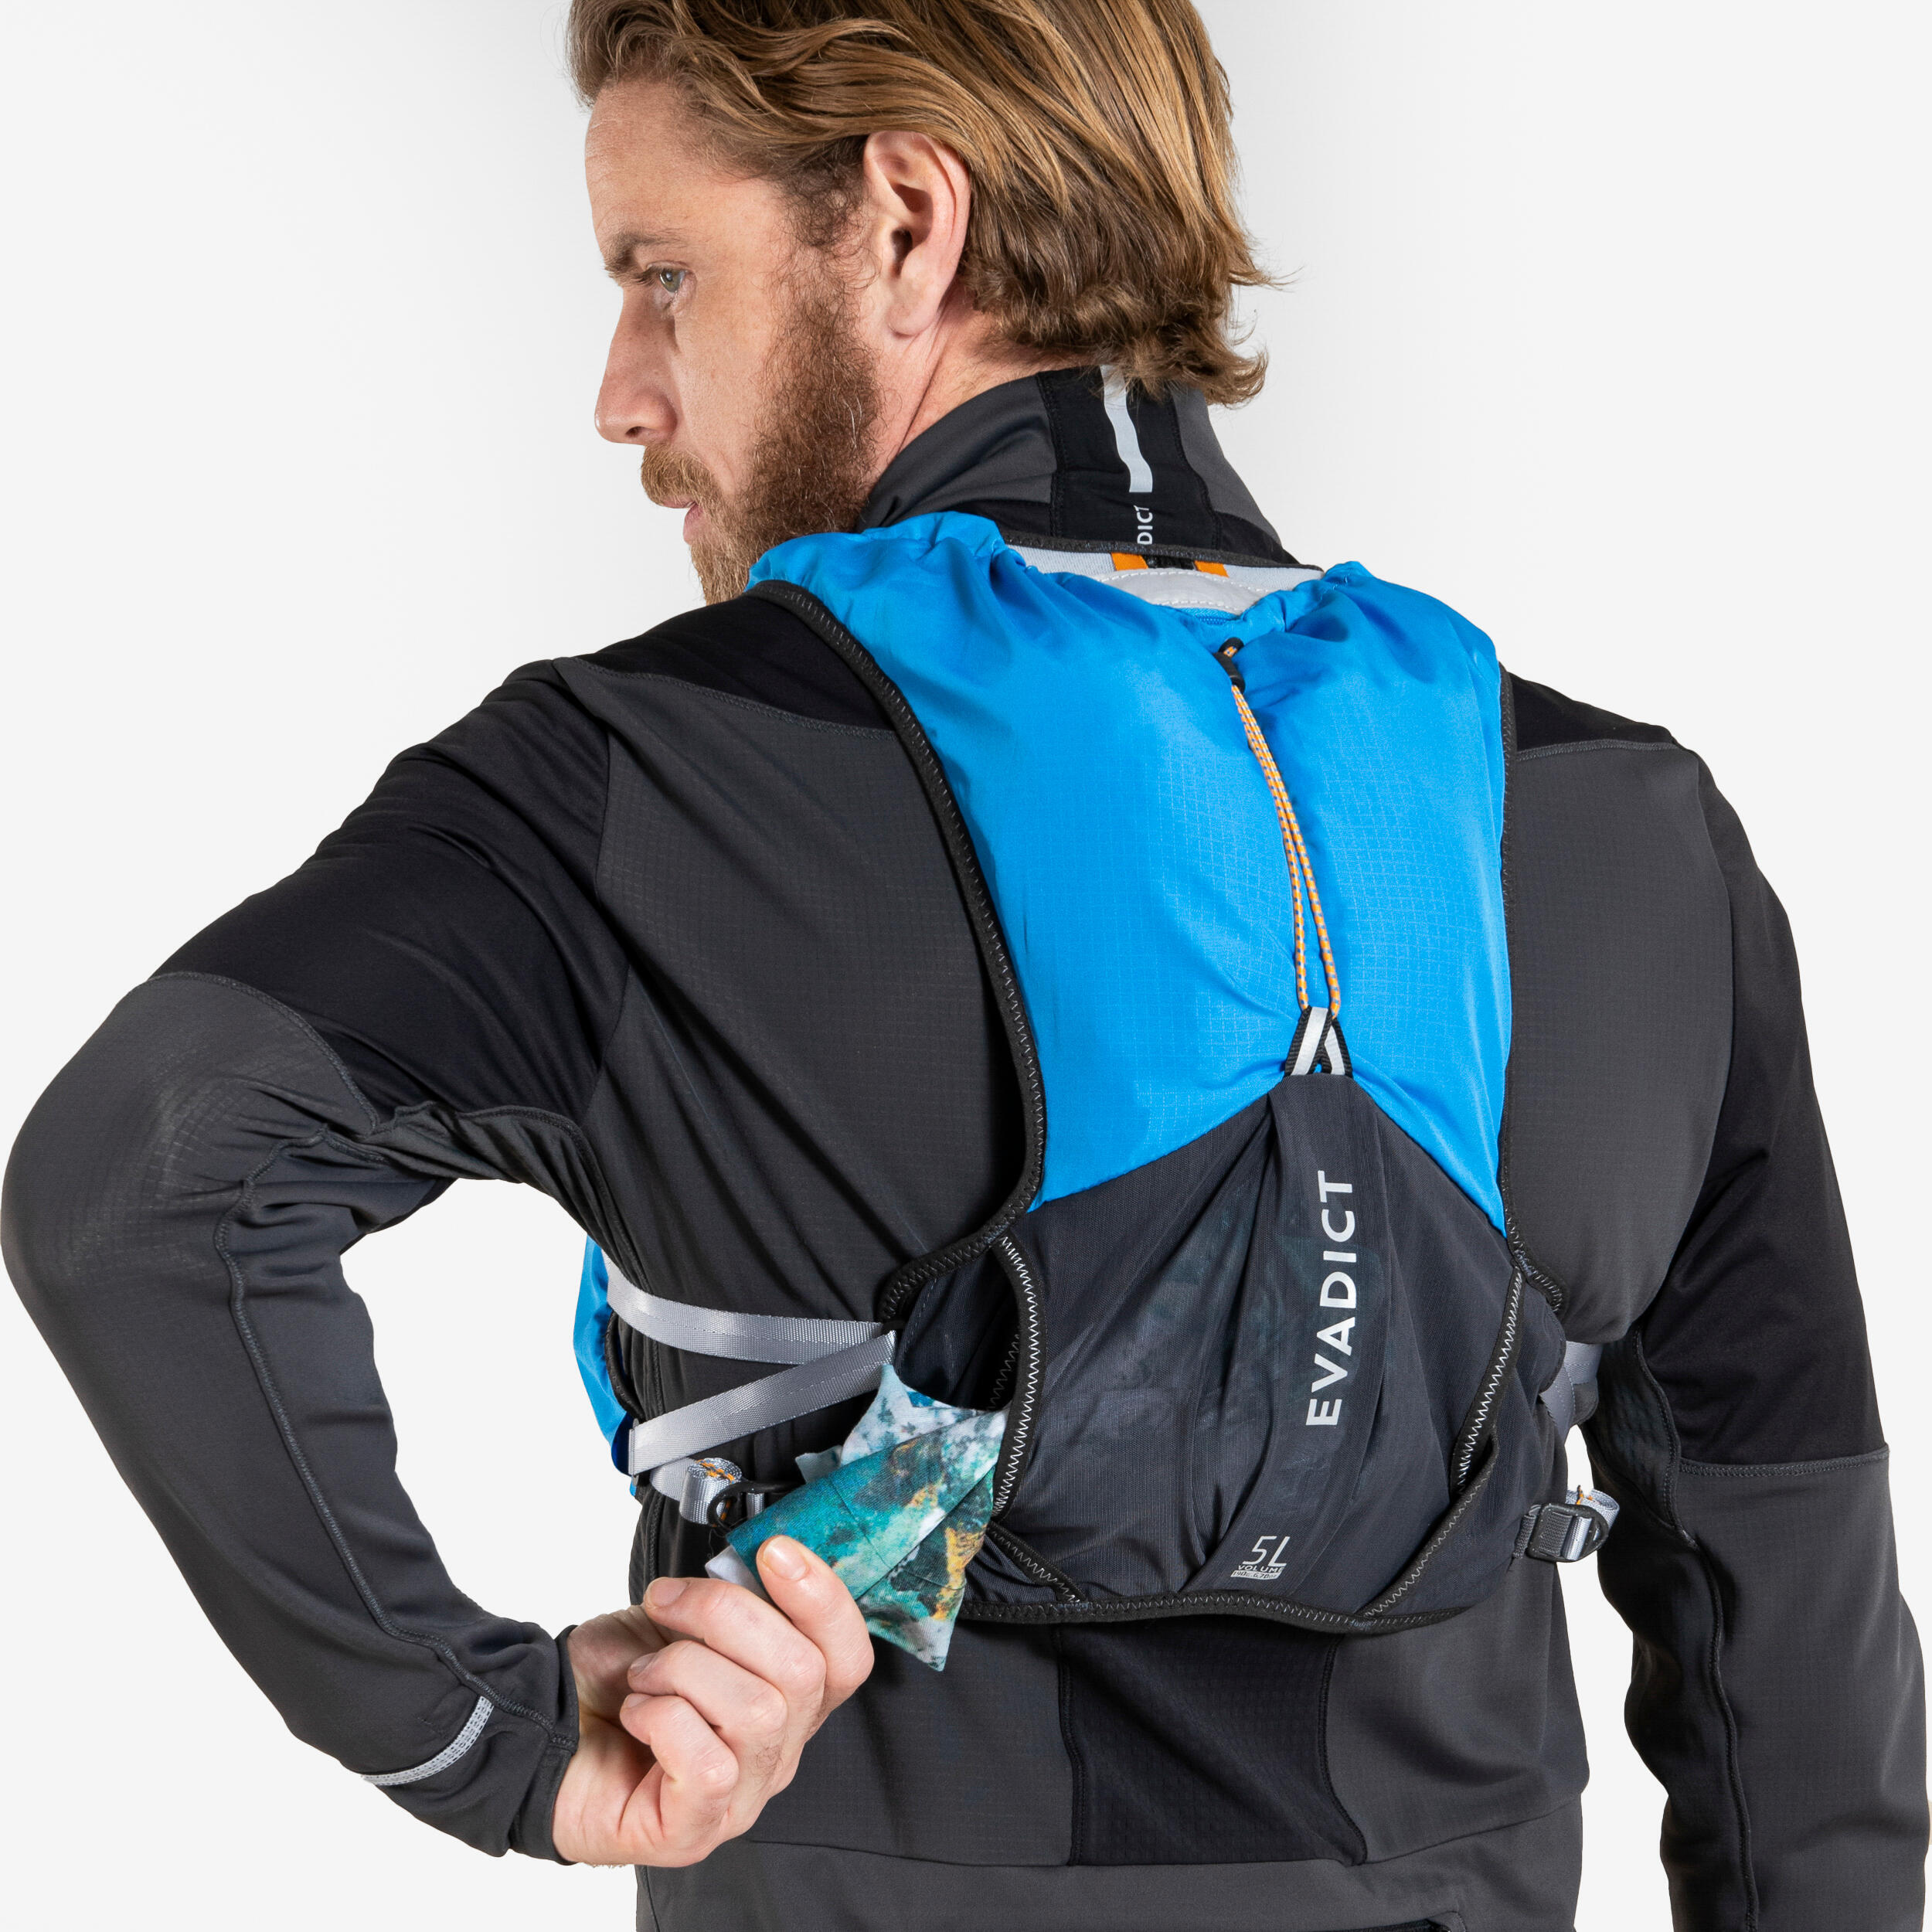 5L TRAIL RUNNING BAG - BLUE - SOLD WITH 1L WATER BLADDER 12/12